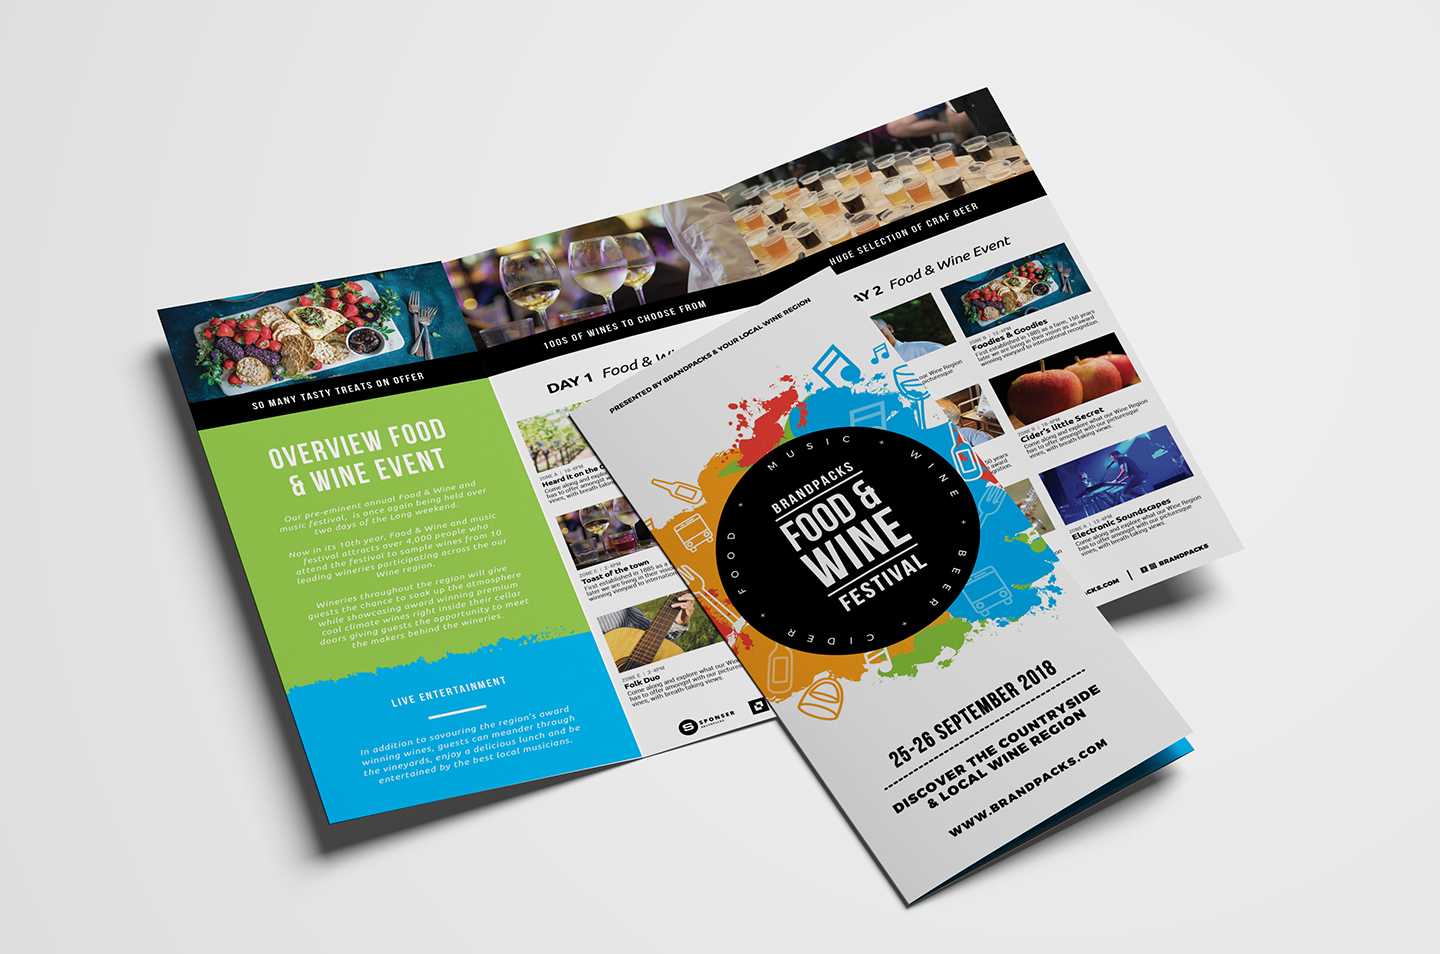 Free Tri Fold Brochure Template For Events & Festivals – Psd Inside 3 Fold Brochure Template Psd Free Download